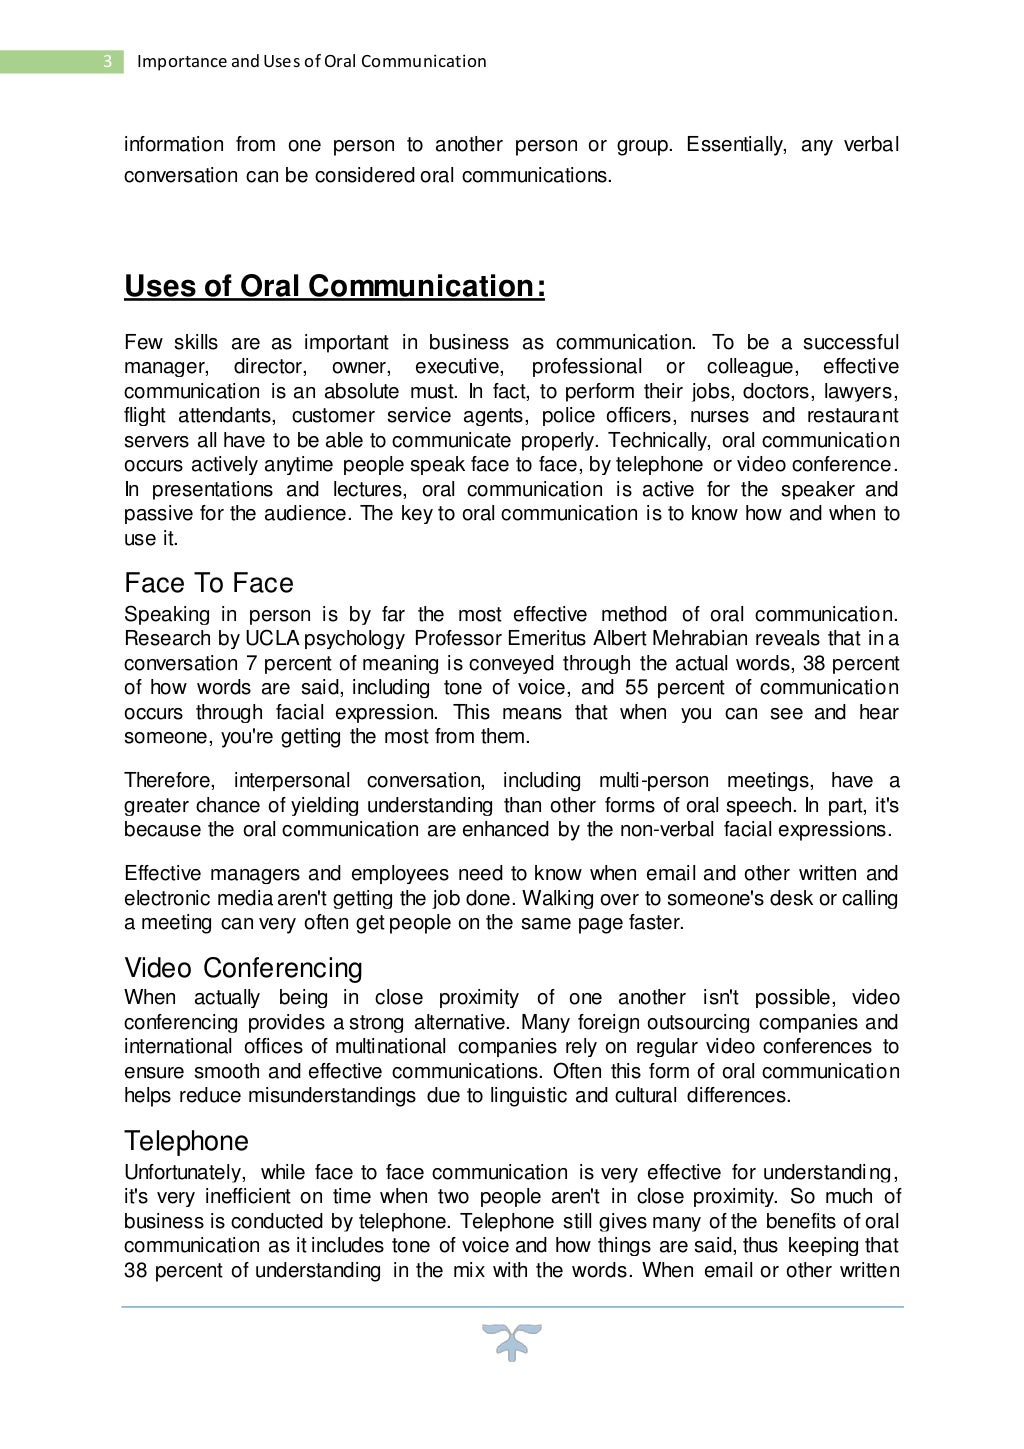 write an essay on communication skills and oral presentation